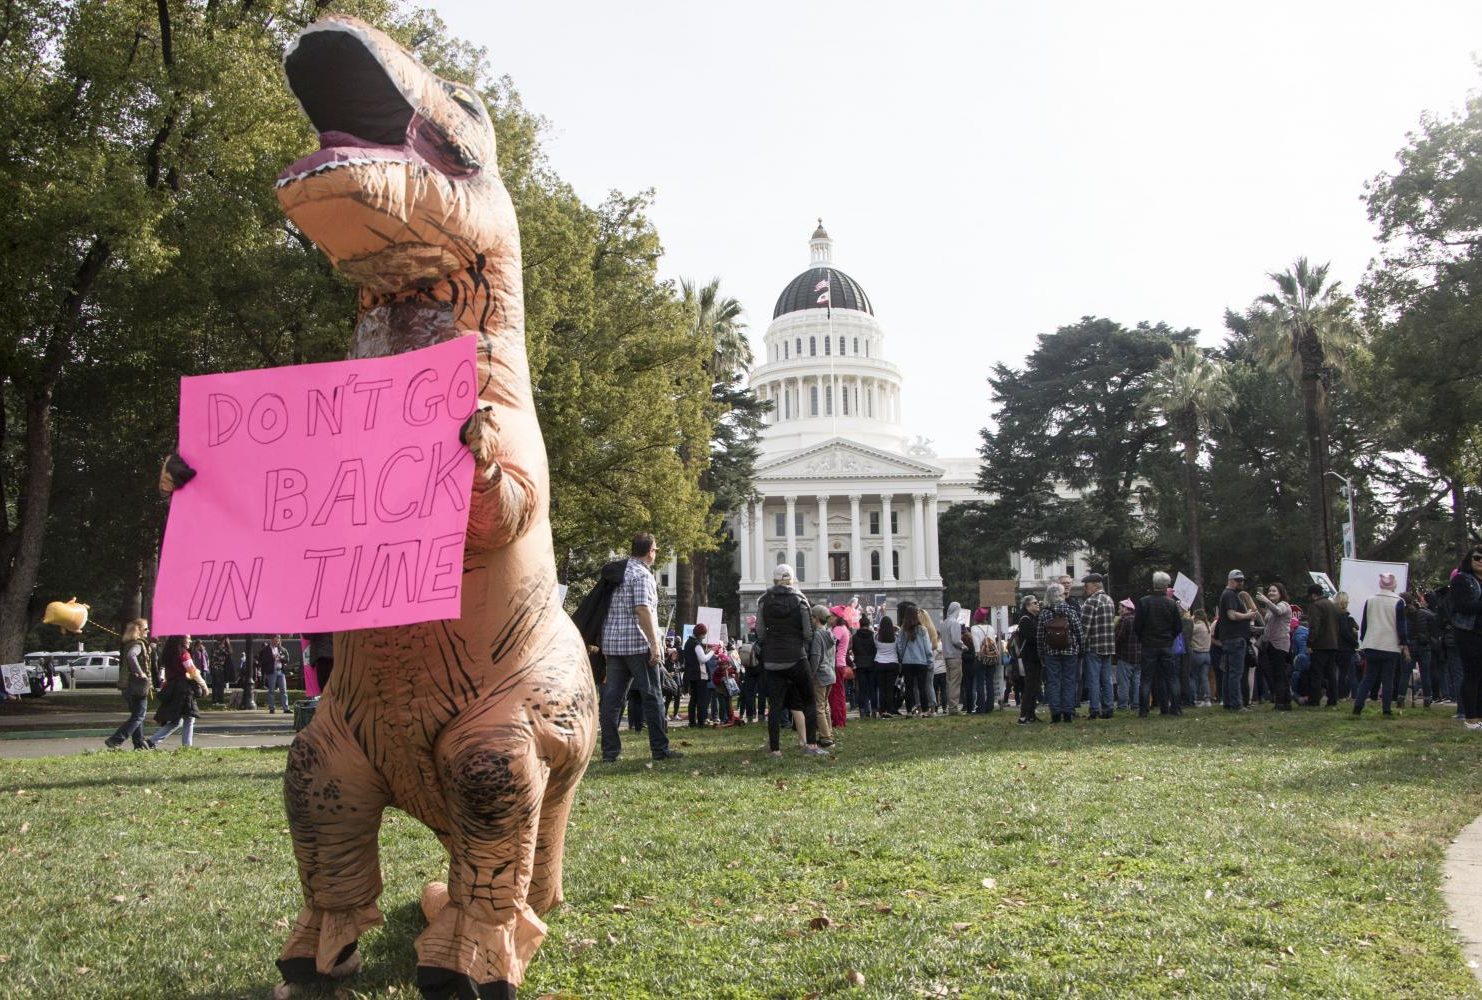 A demonstrator dressed in a dinosaur costume holds up a sign that reads “Don’t Go Back In Time” in front of the California State Capitol during third annual Women’s March in Sacramento, Calif. on Jan. 19, 2019.